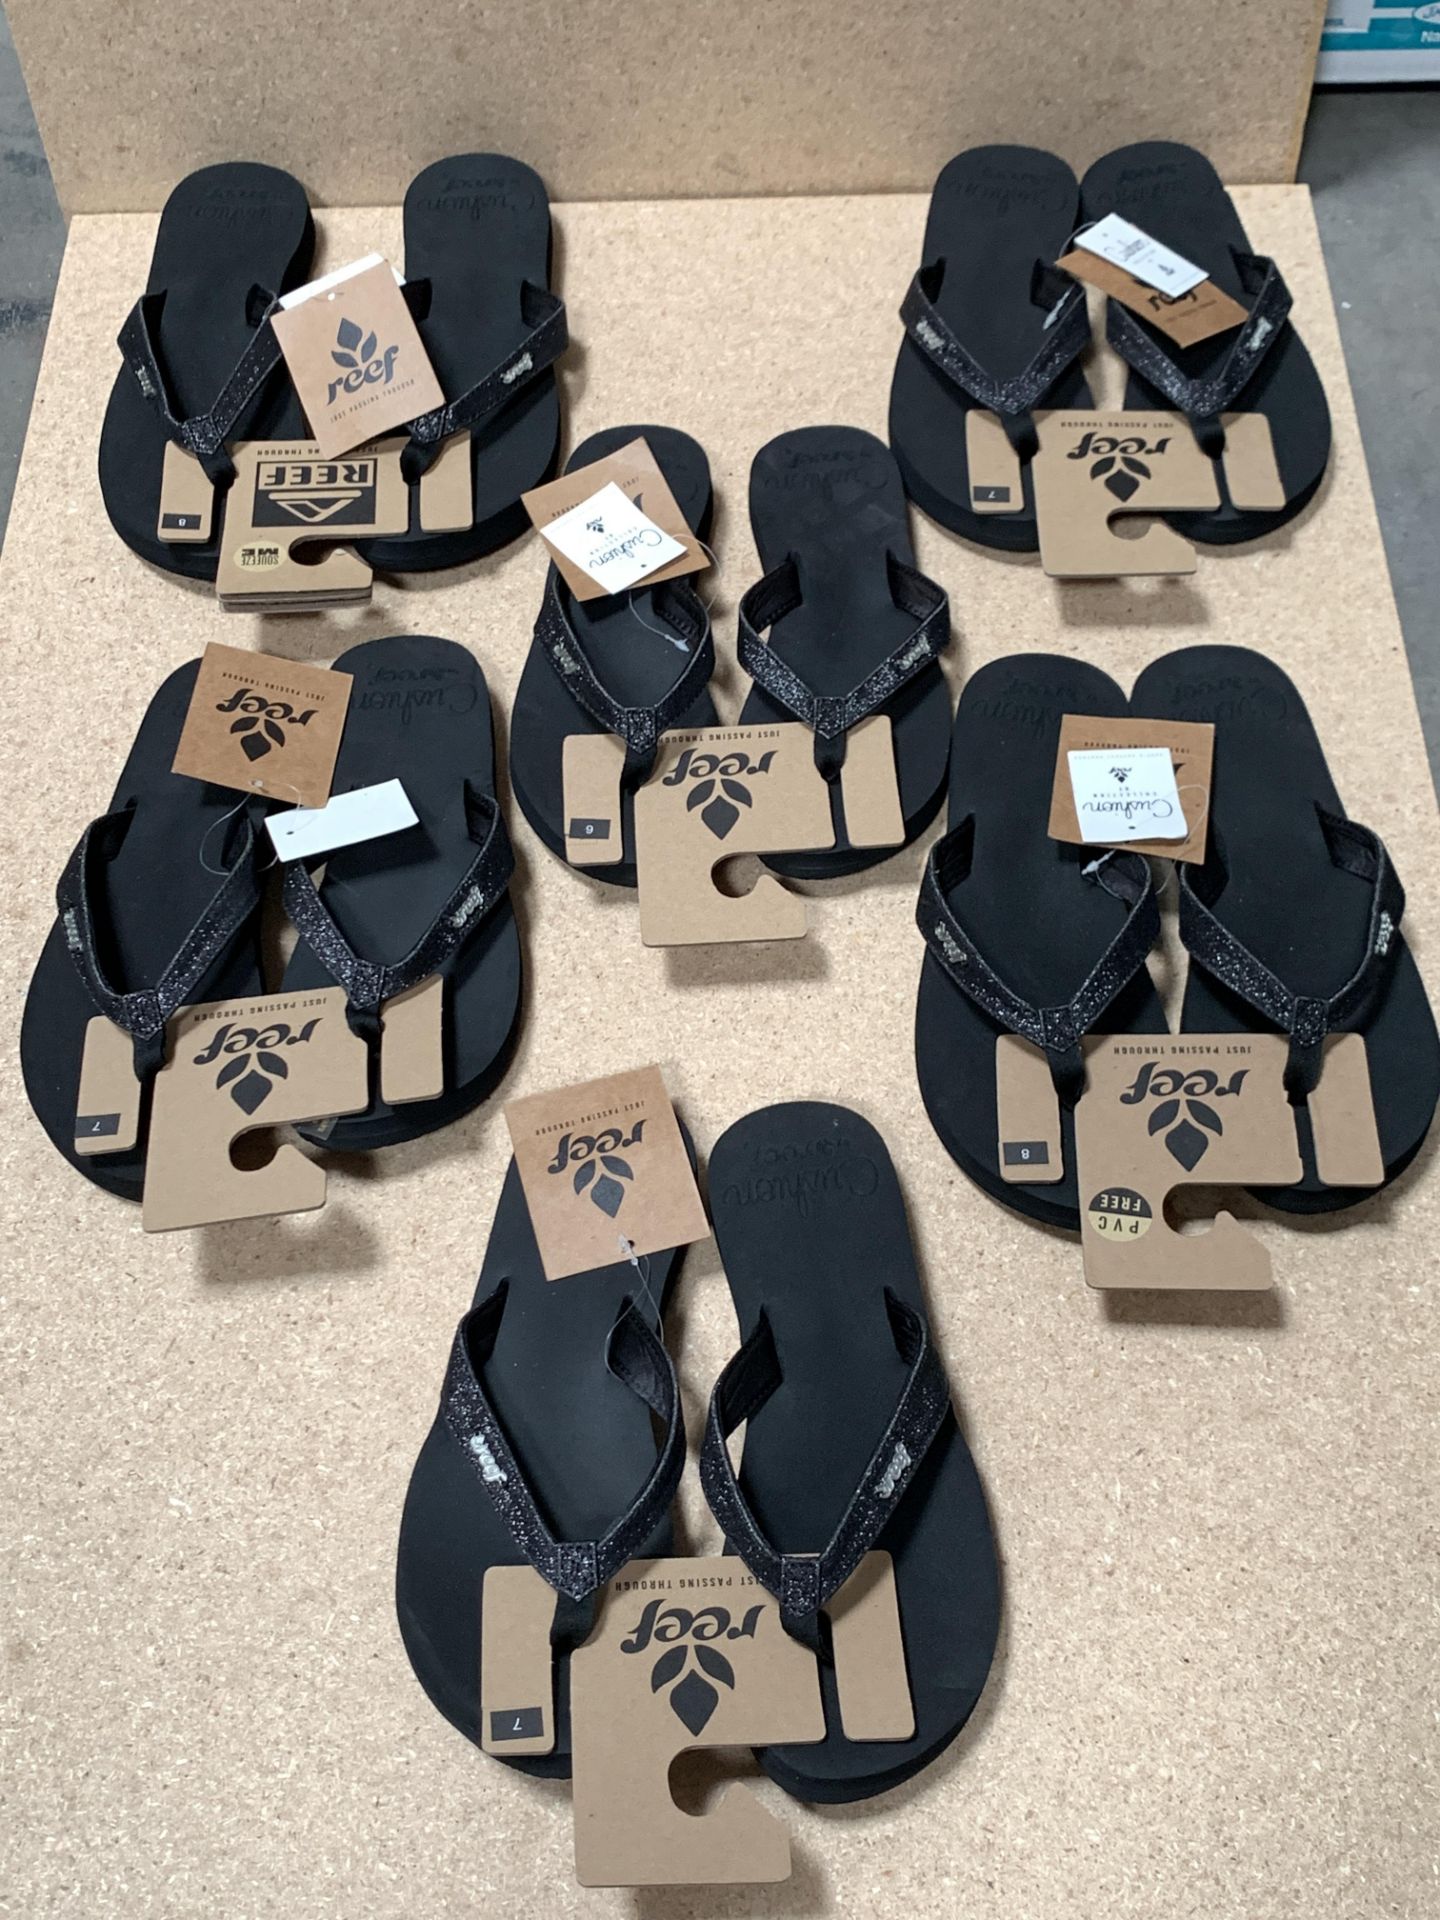 6 Pairs REEF Flip Flop Sandals, Star Cushion Black, New w. Tags, Various Sizes (Retail $282) - Image 2 of 5